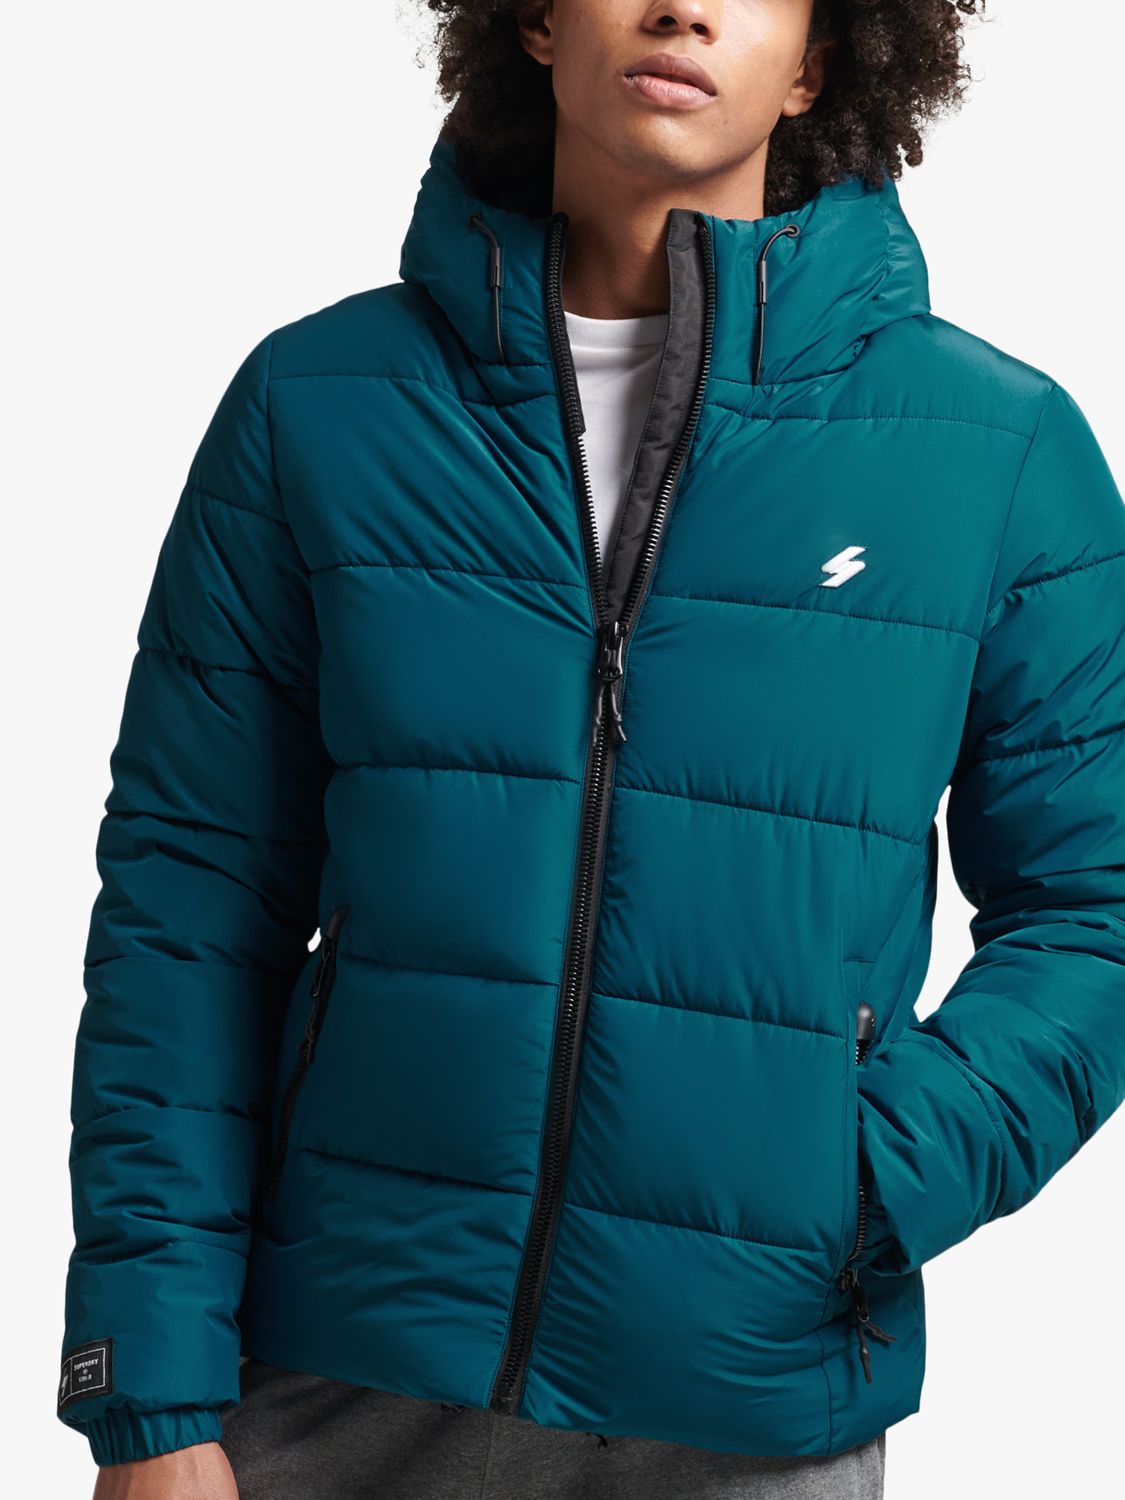 Superdry Hooded Lewis Partners & Sailor John at Blue Sports Puffer Jacket